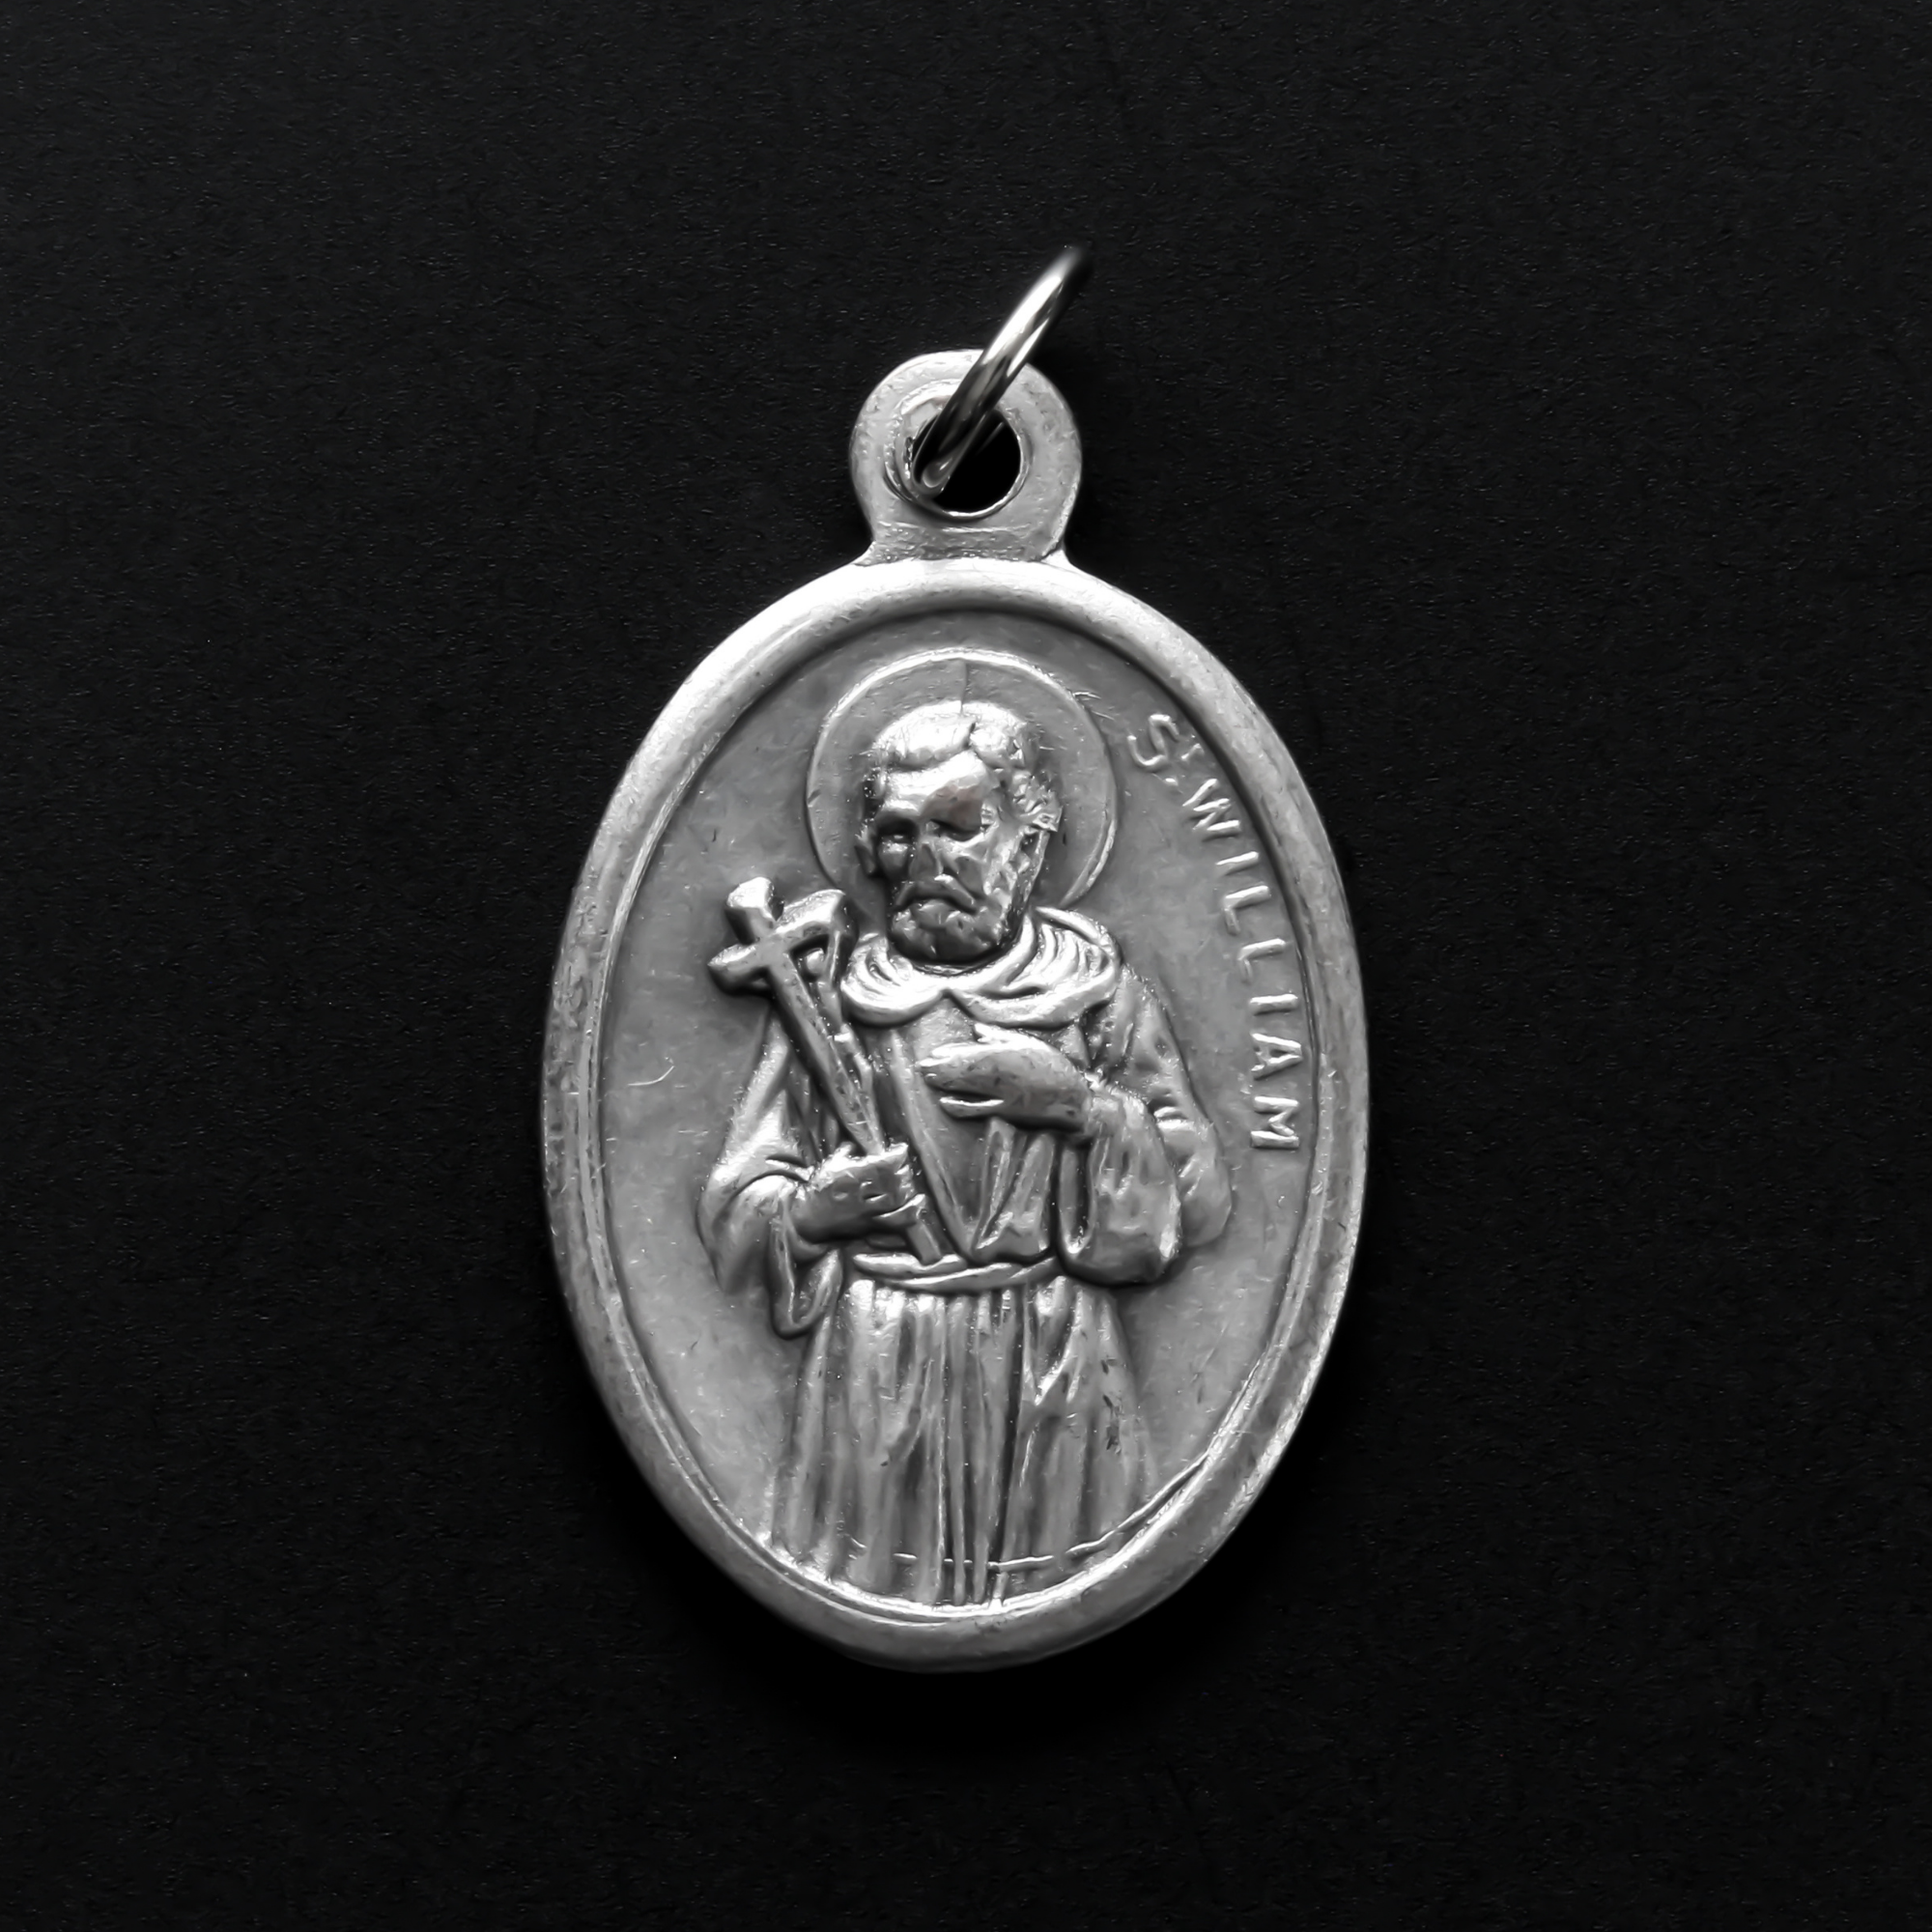 Saint William pray for us 1" oxidized silver medal made in Italy